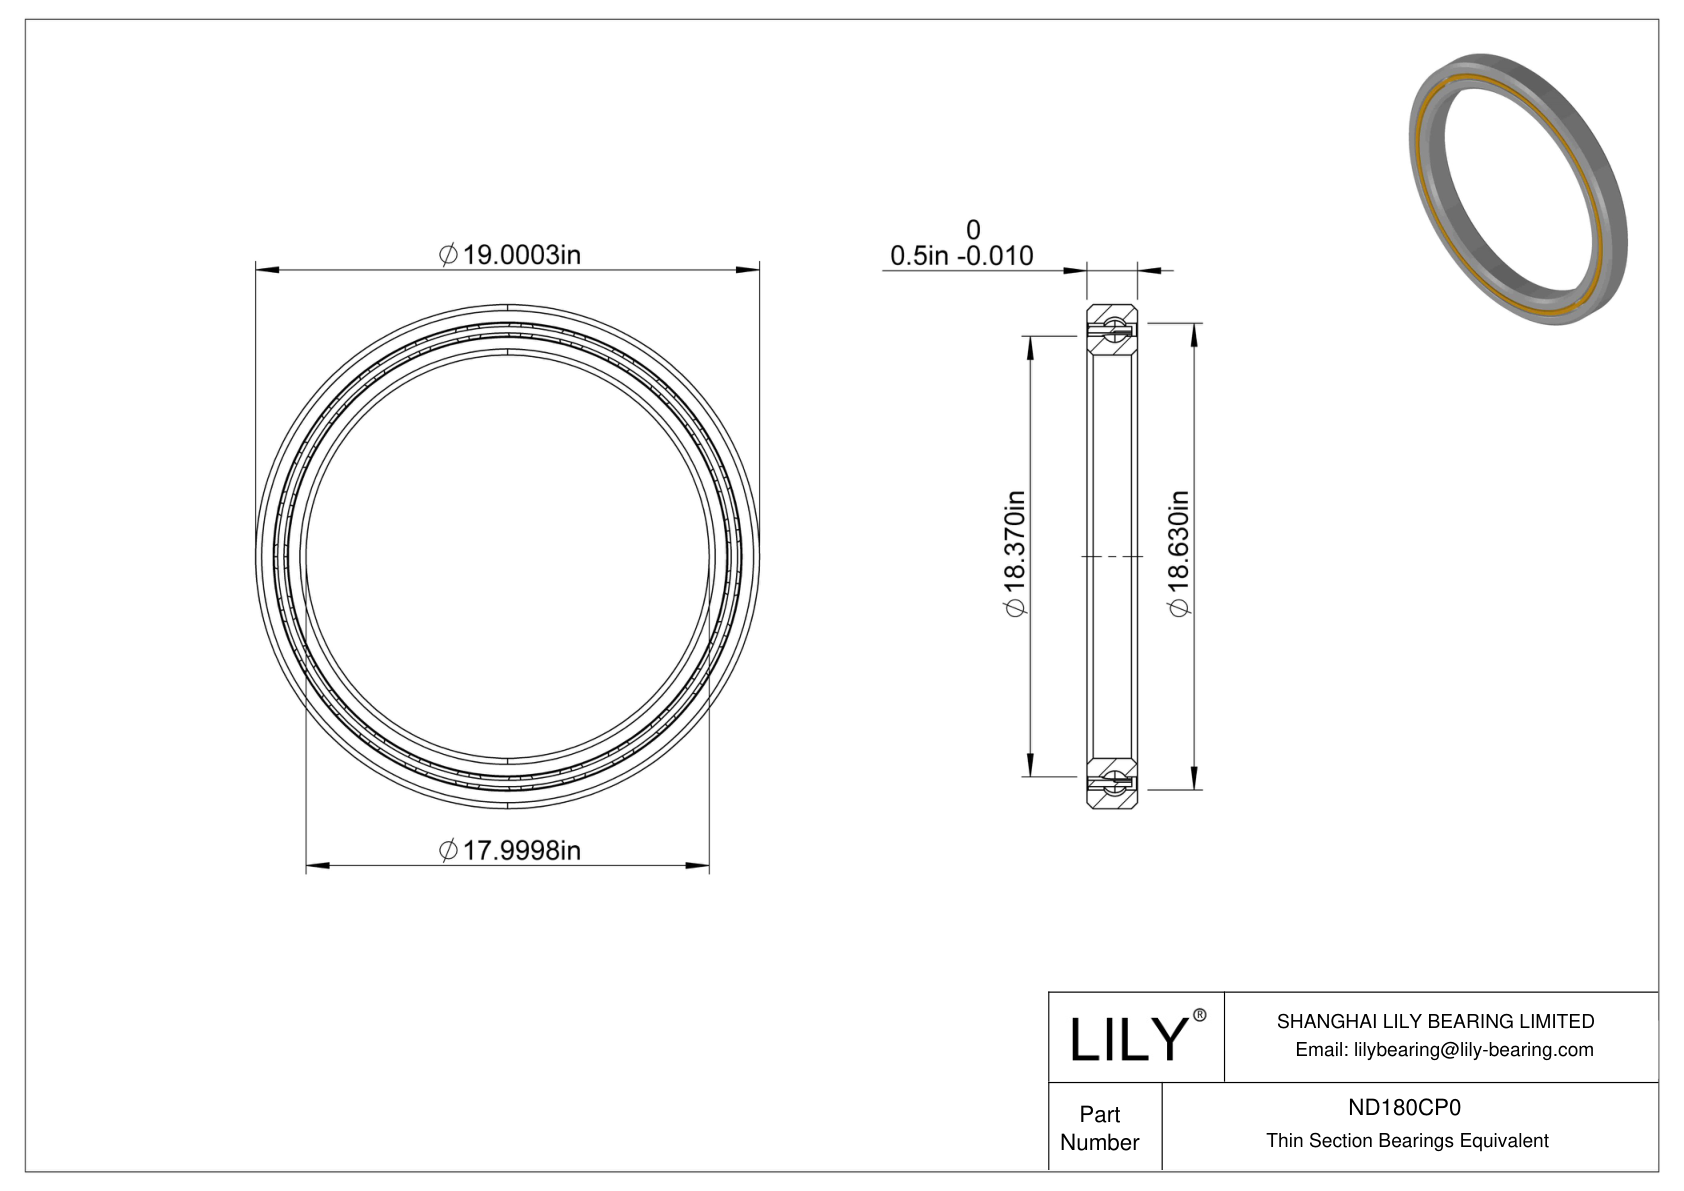 ND180CP0 Constant Section (CS) Bearings cad drawing